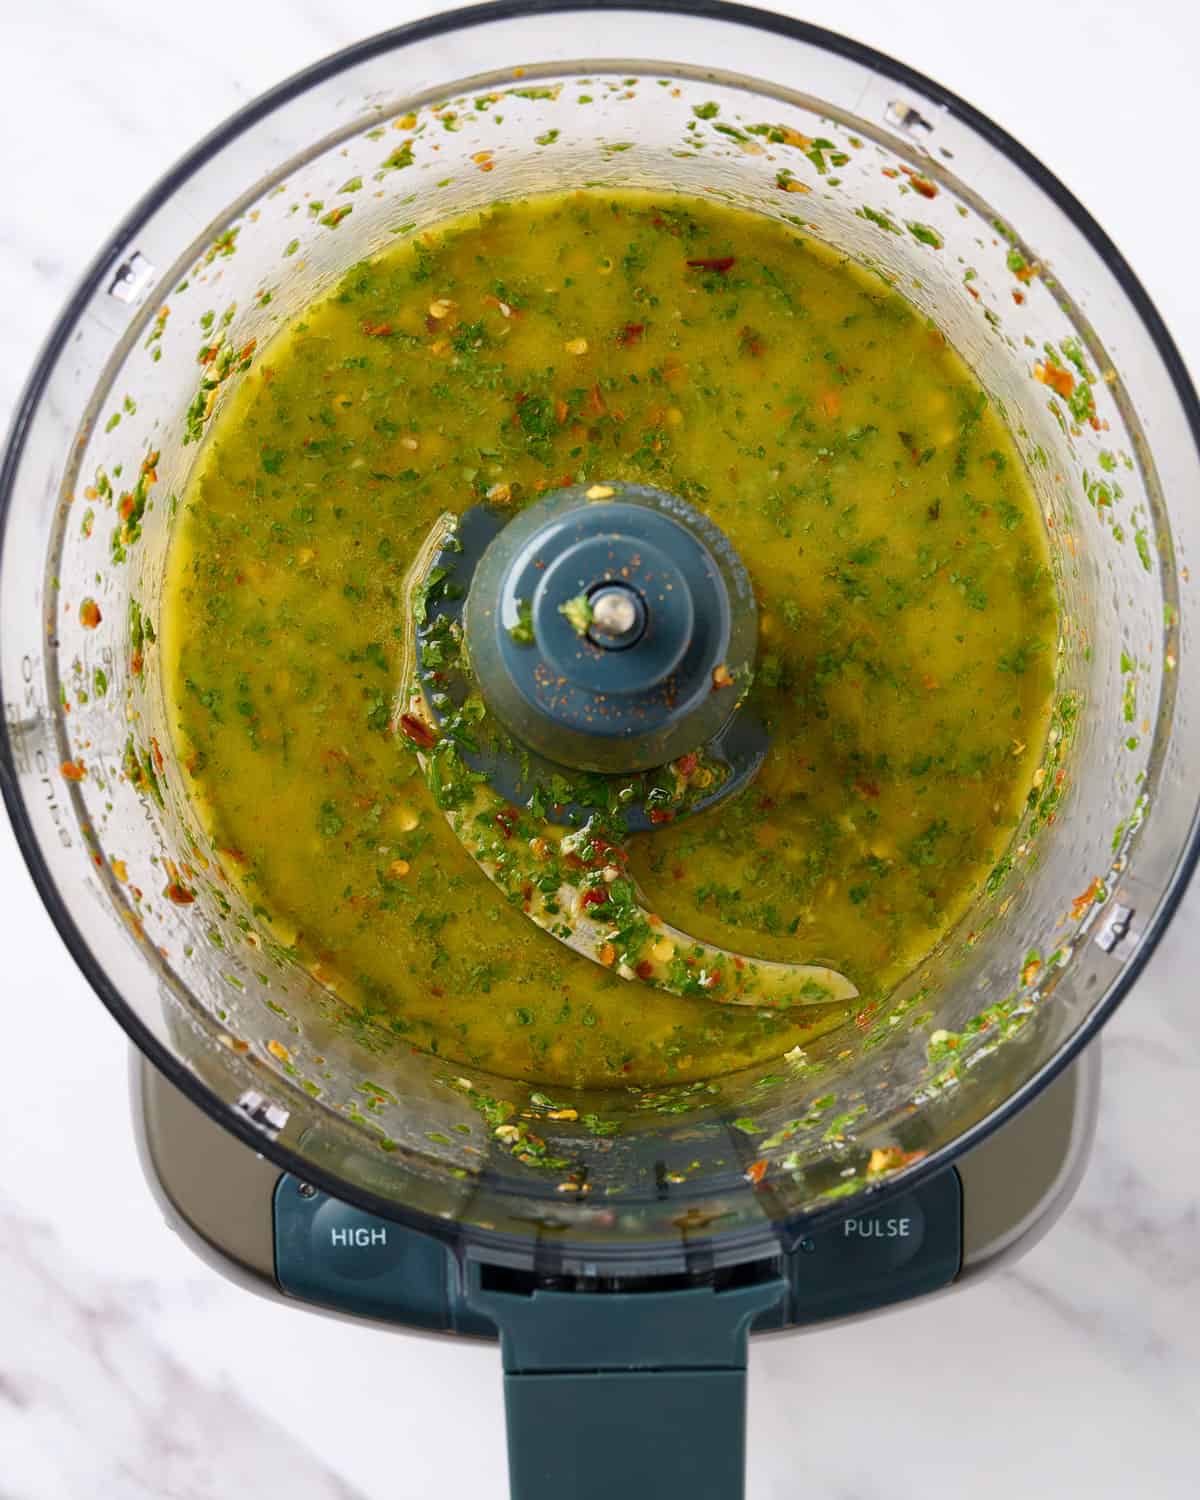 Spicy chimichurri finished in food processor.